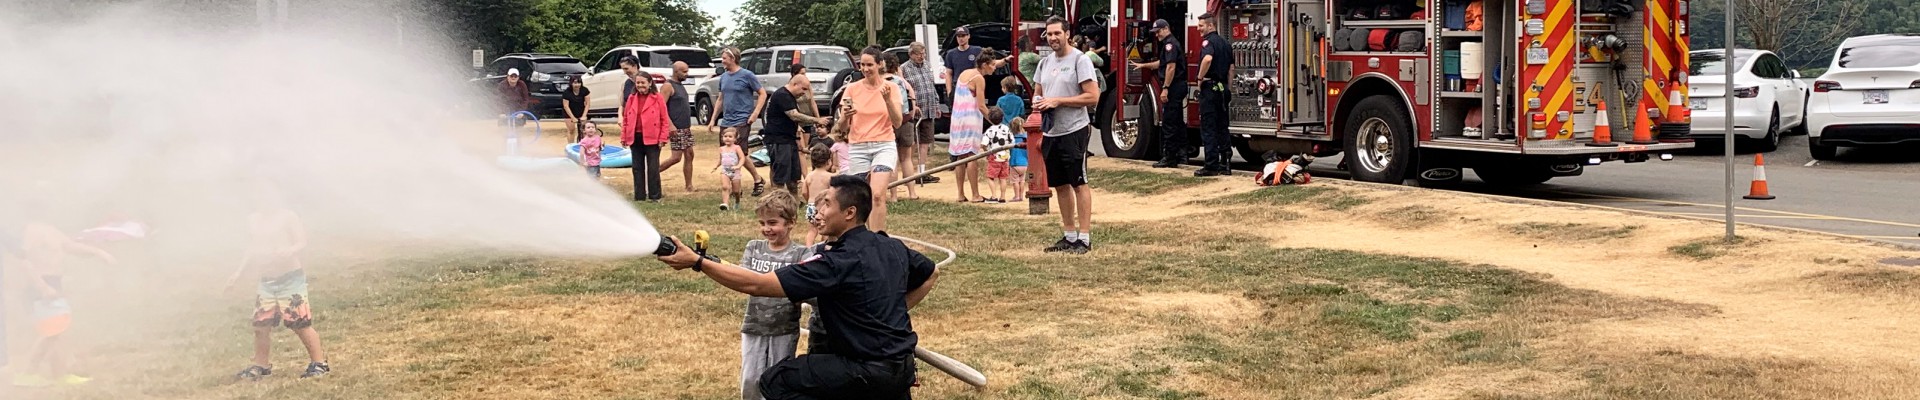 A smiling firefighter stands beside a young boy who is practising using a firehouse in the park. Other community residents are smiling and talking with firefighters in the background.